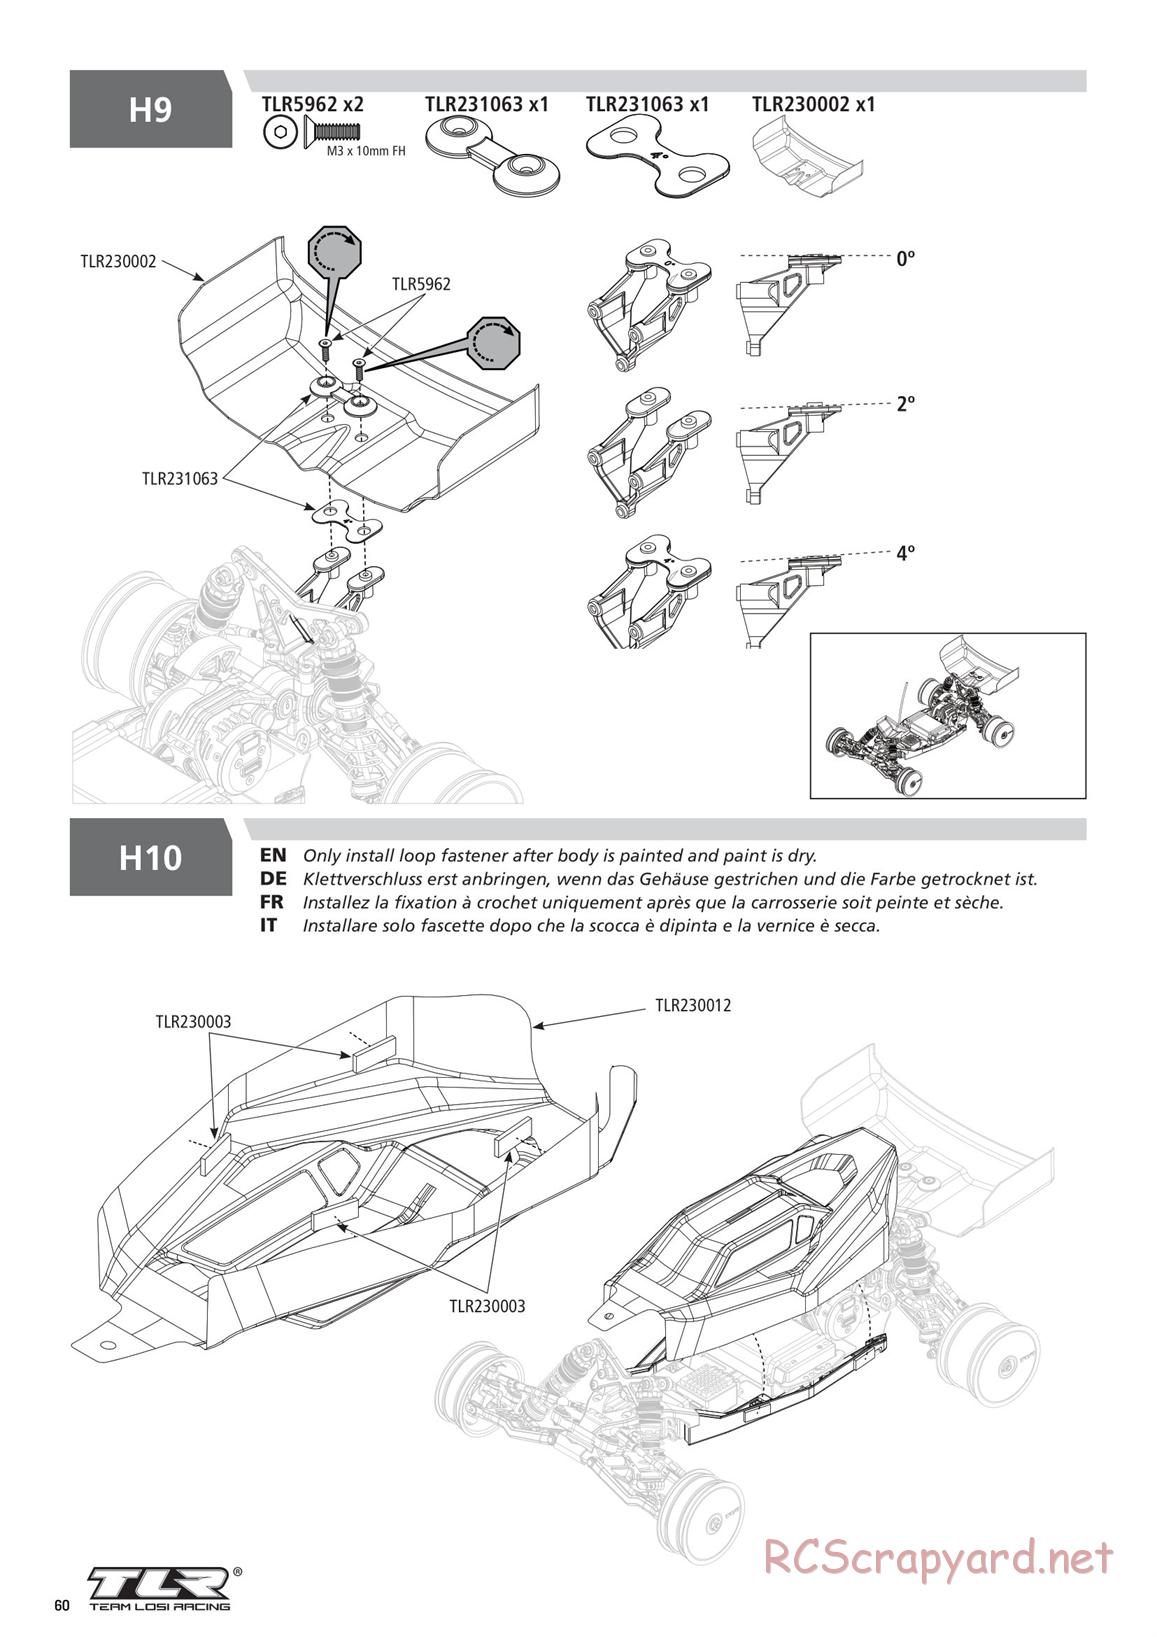 Team Losi - TLR 22 5.0 DC Race - Manual - Page 60